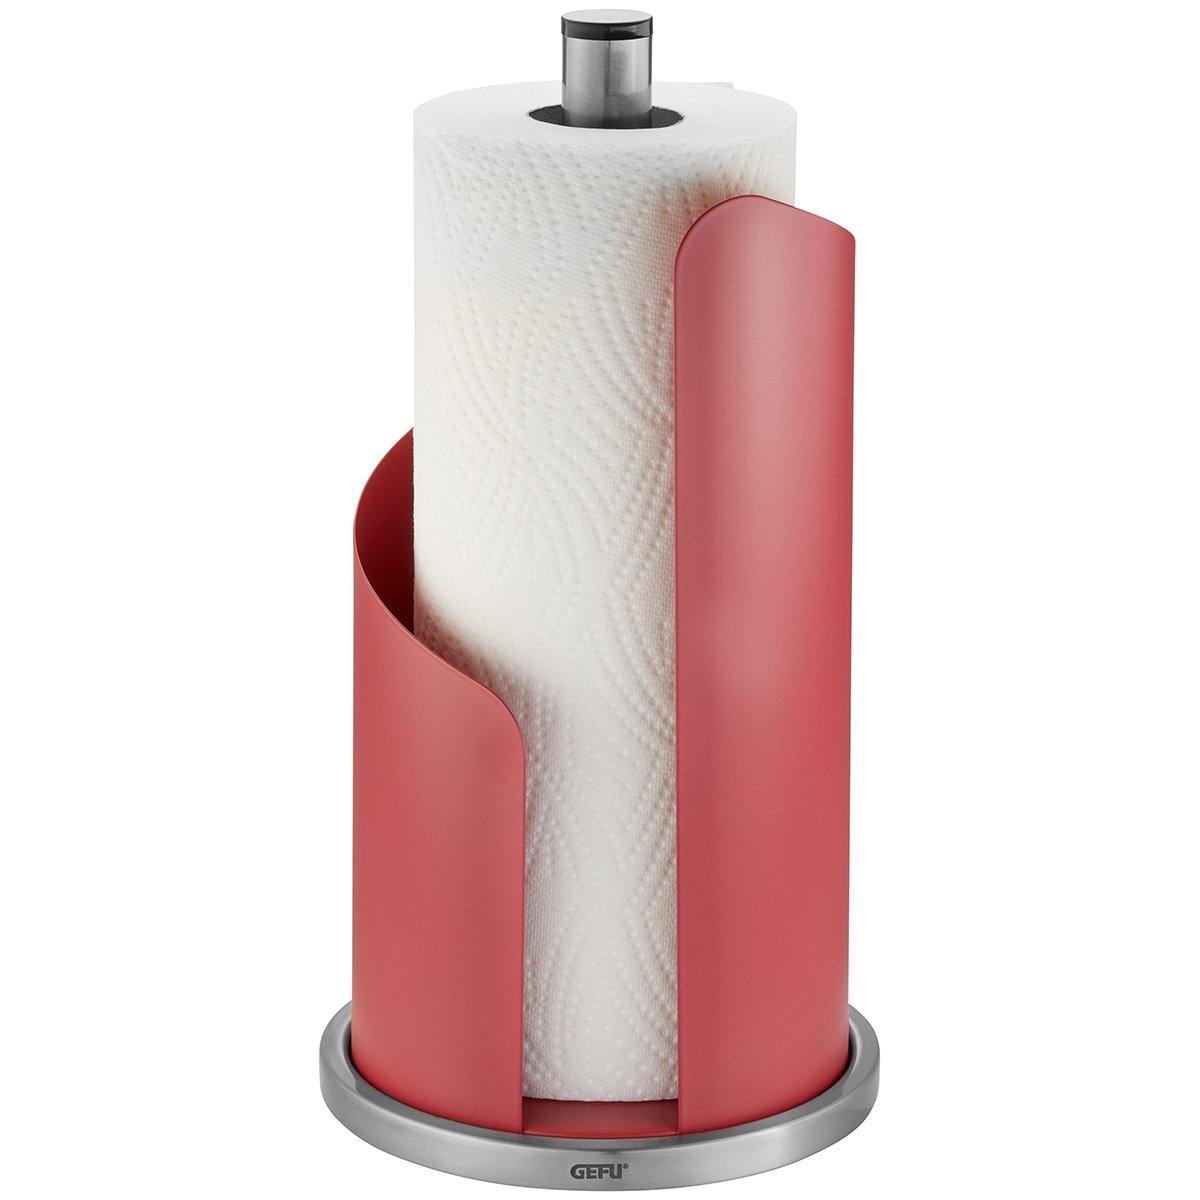 GEFU Kitchen Roll Holder Curve, Raspberry Red - Whole and All